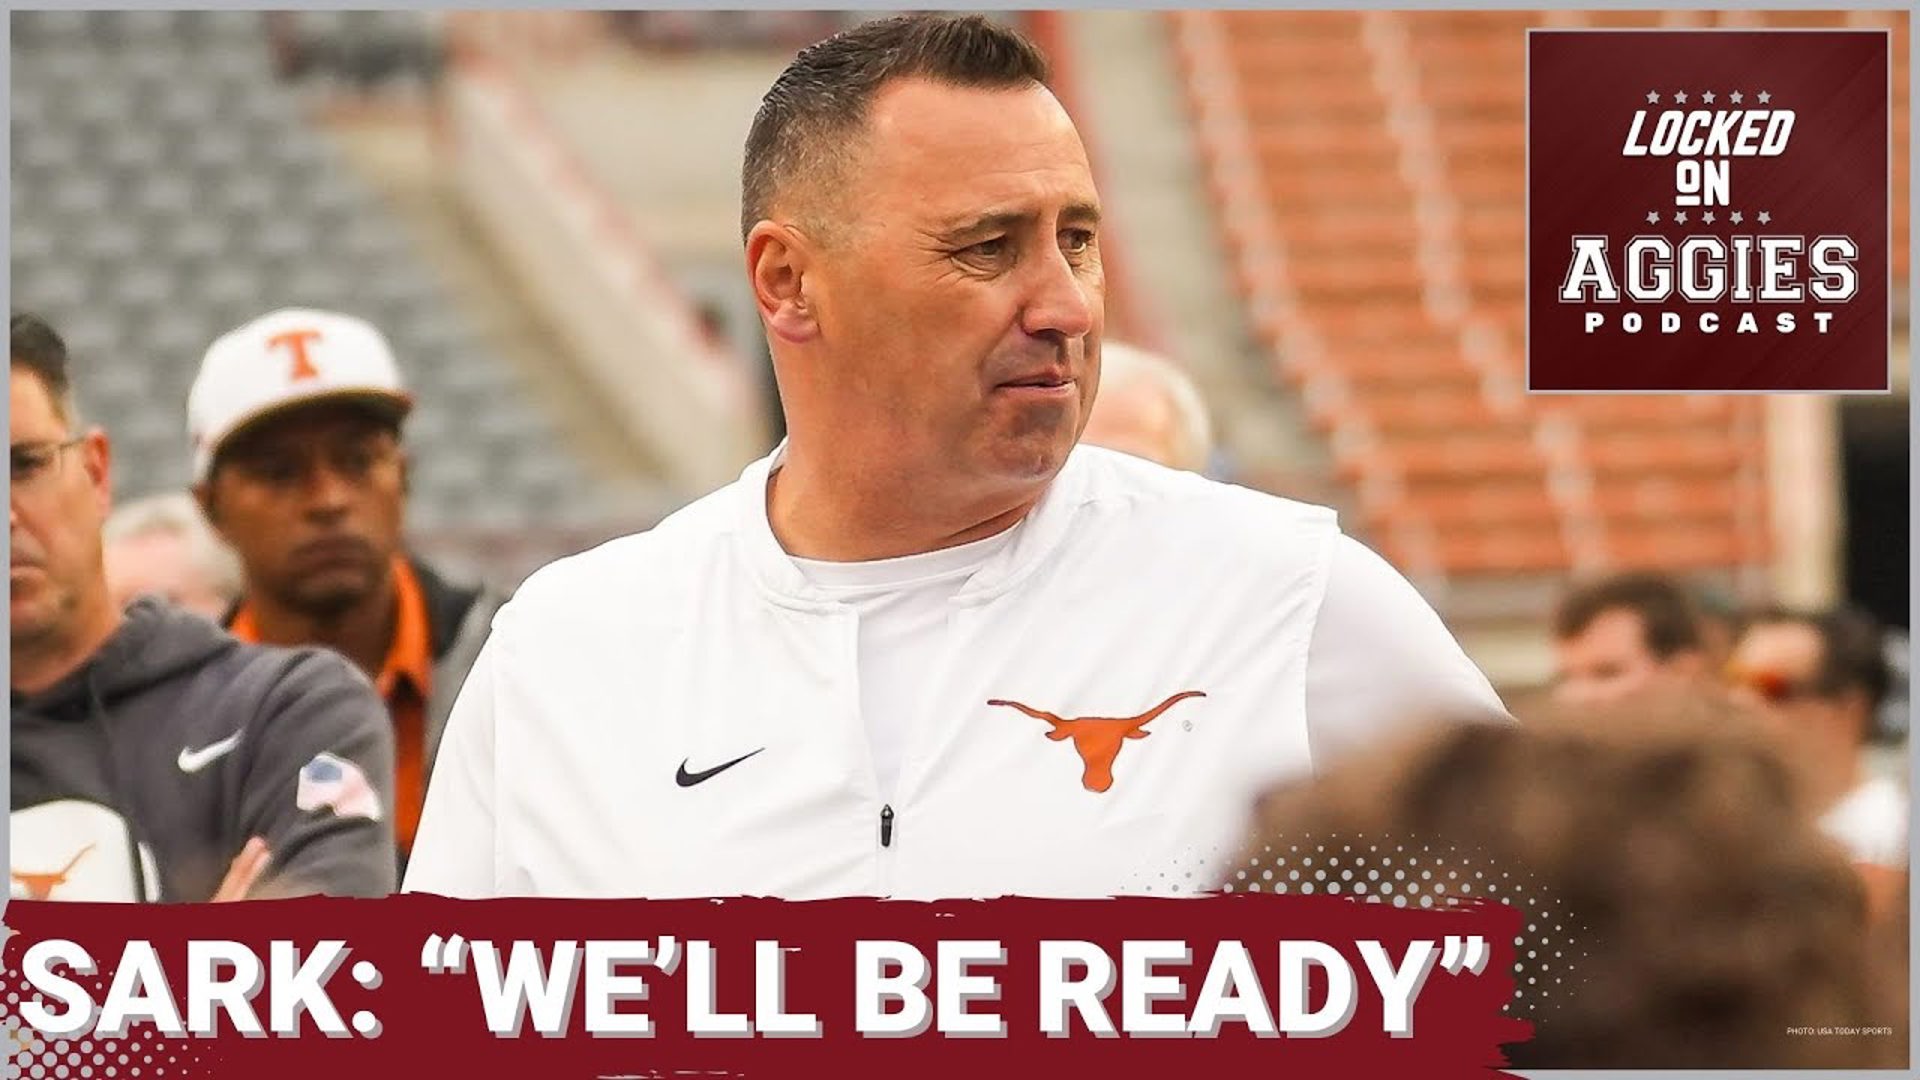 host Andrew Stefaniak talks about a quote from Texas head football coach Steve Sarkisian about the rivalry between Texas and Texas A&M being renewed.